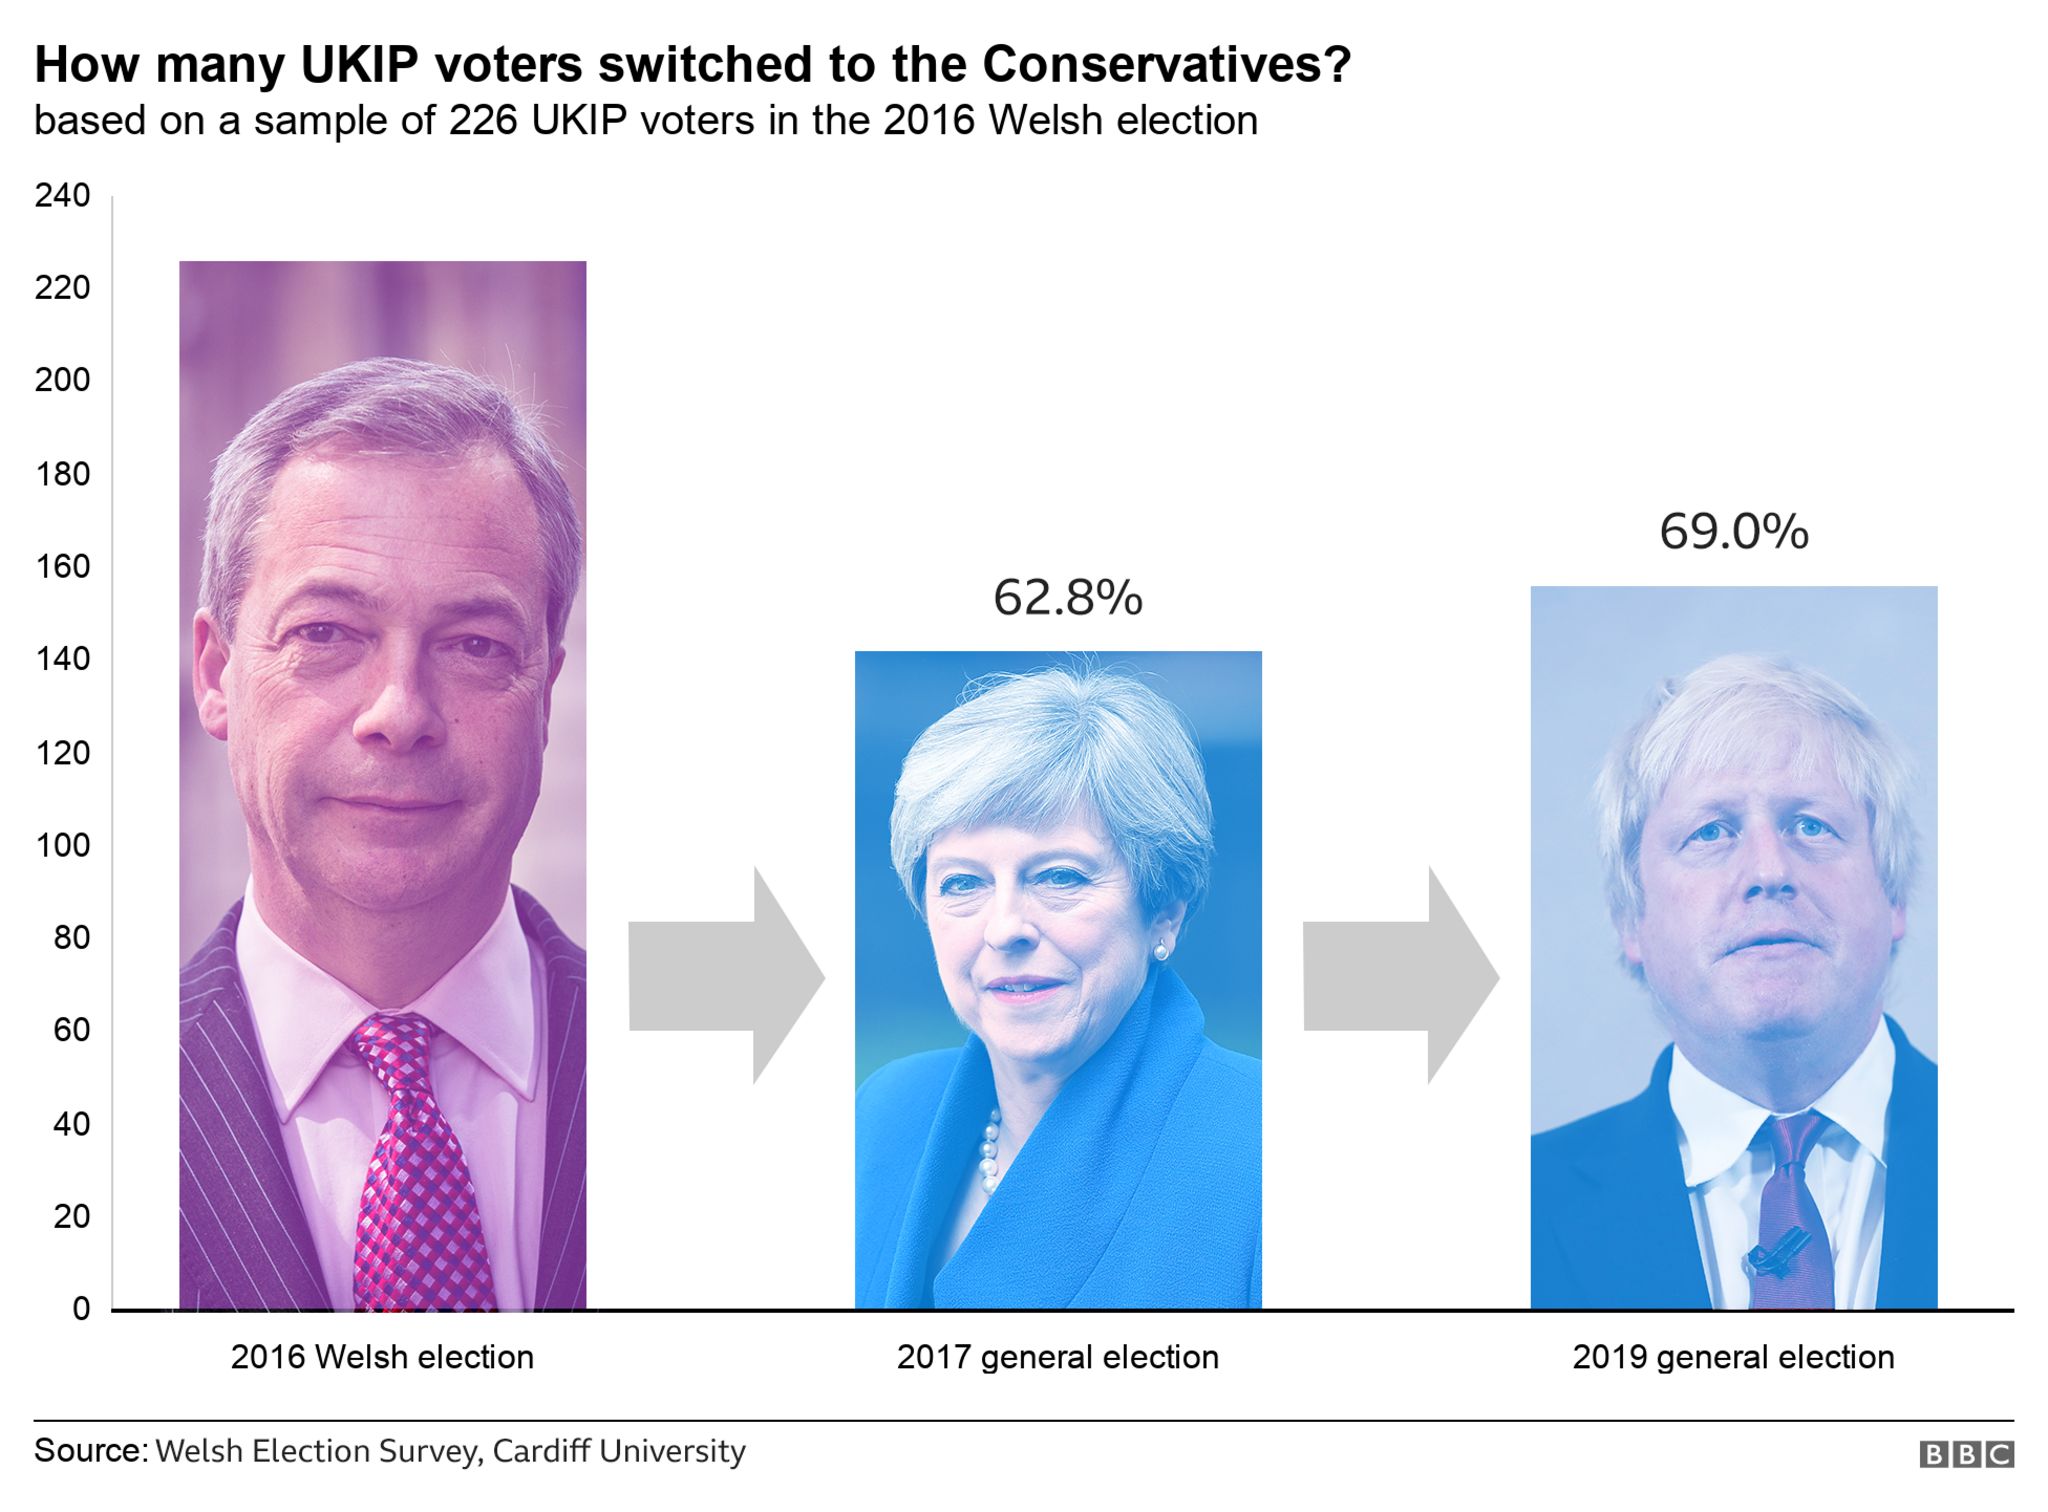 Graph showing the number of voters who switched from UKIP to Conservative